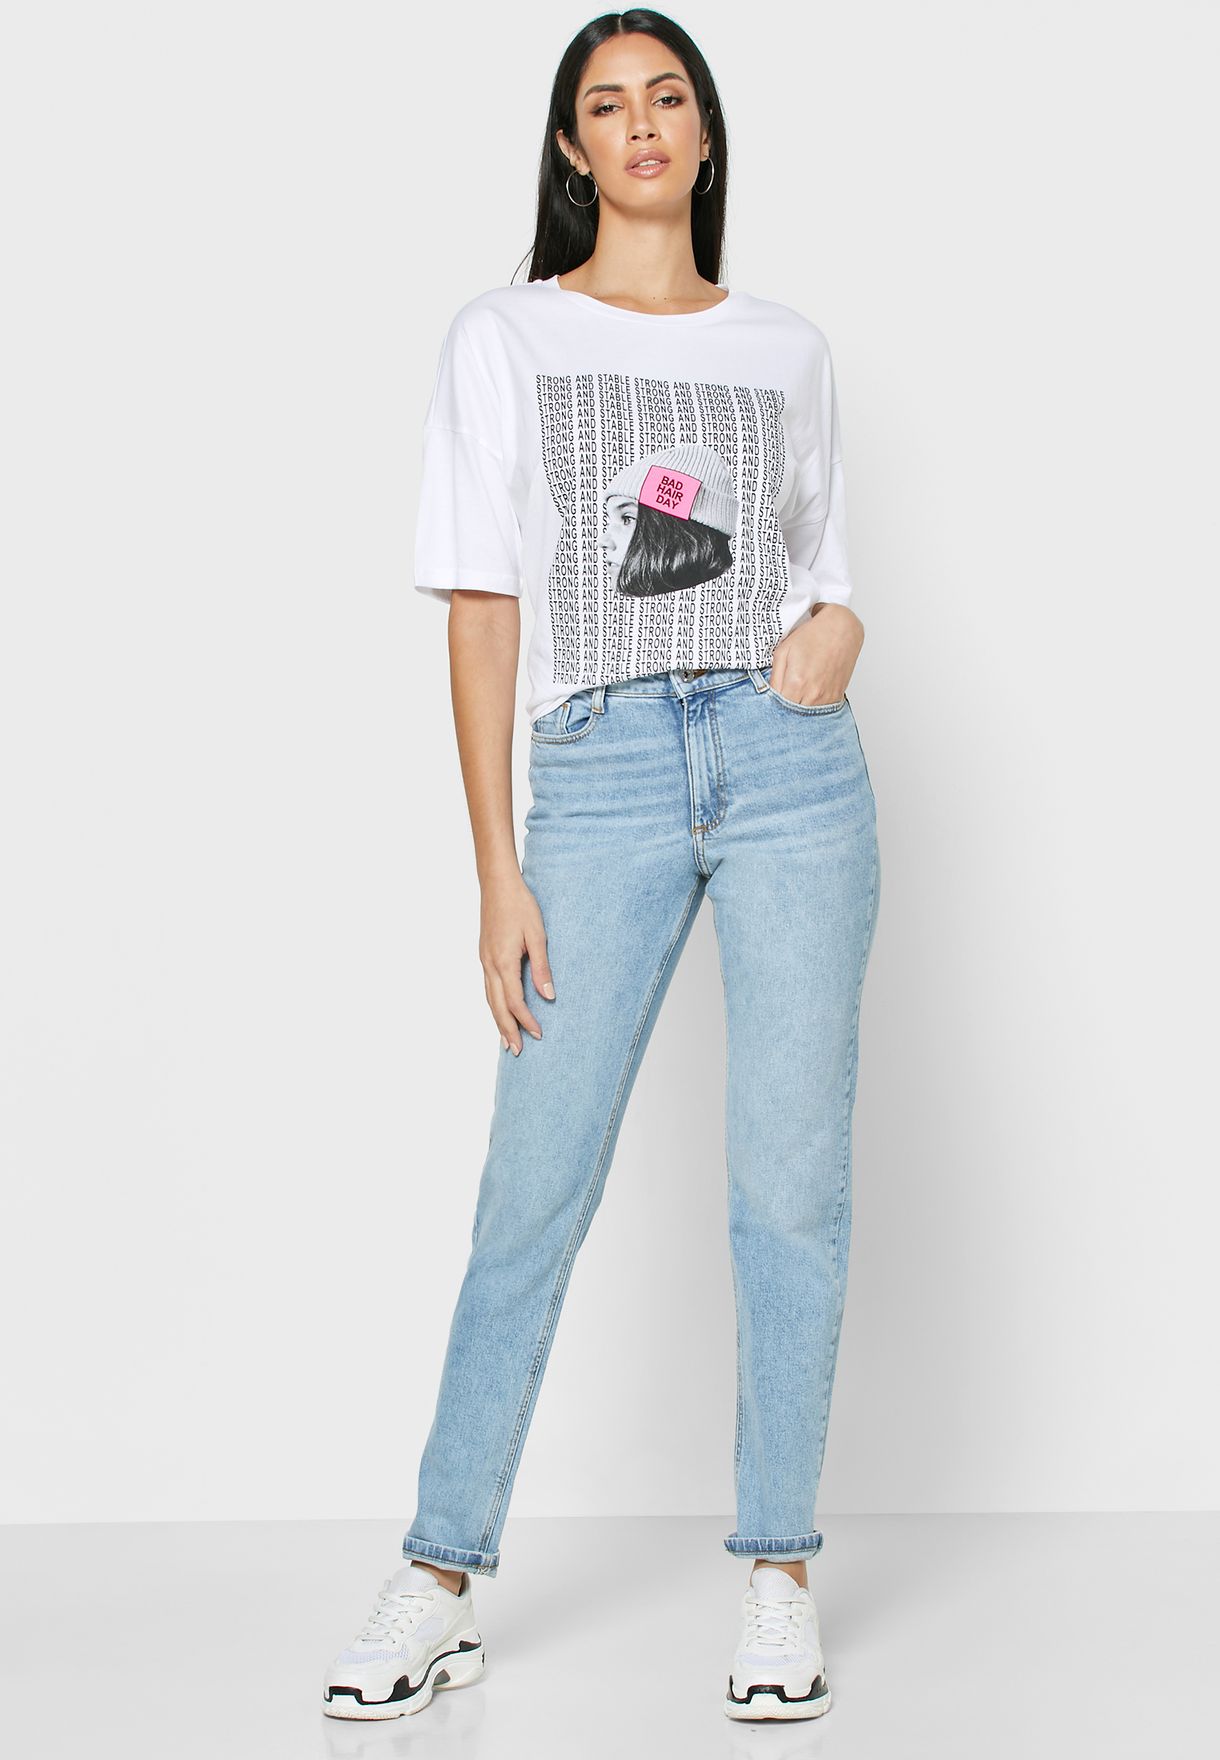 dorothy perkins tall jeans